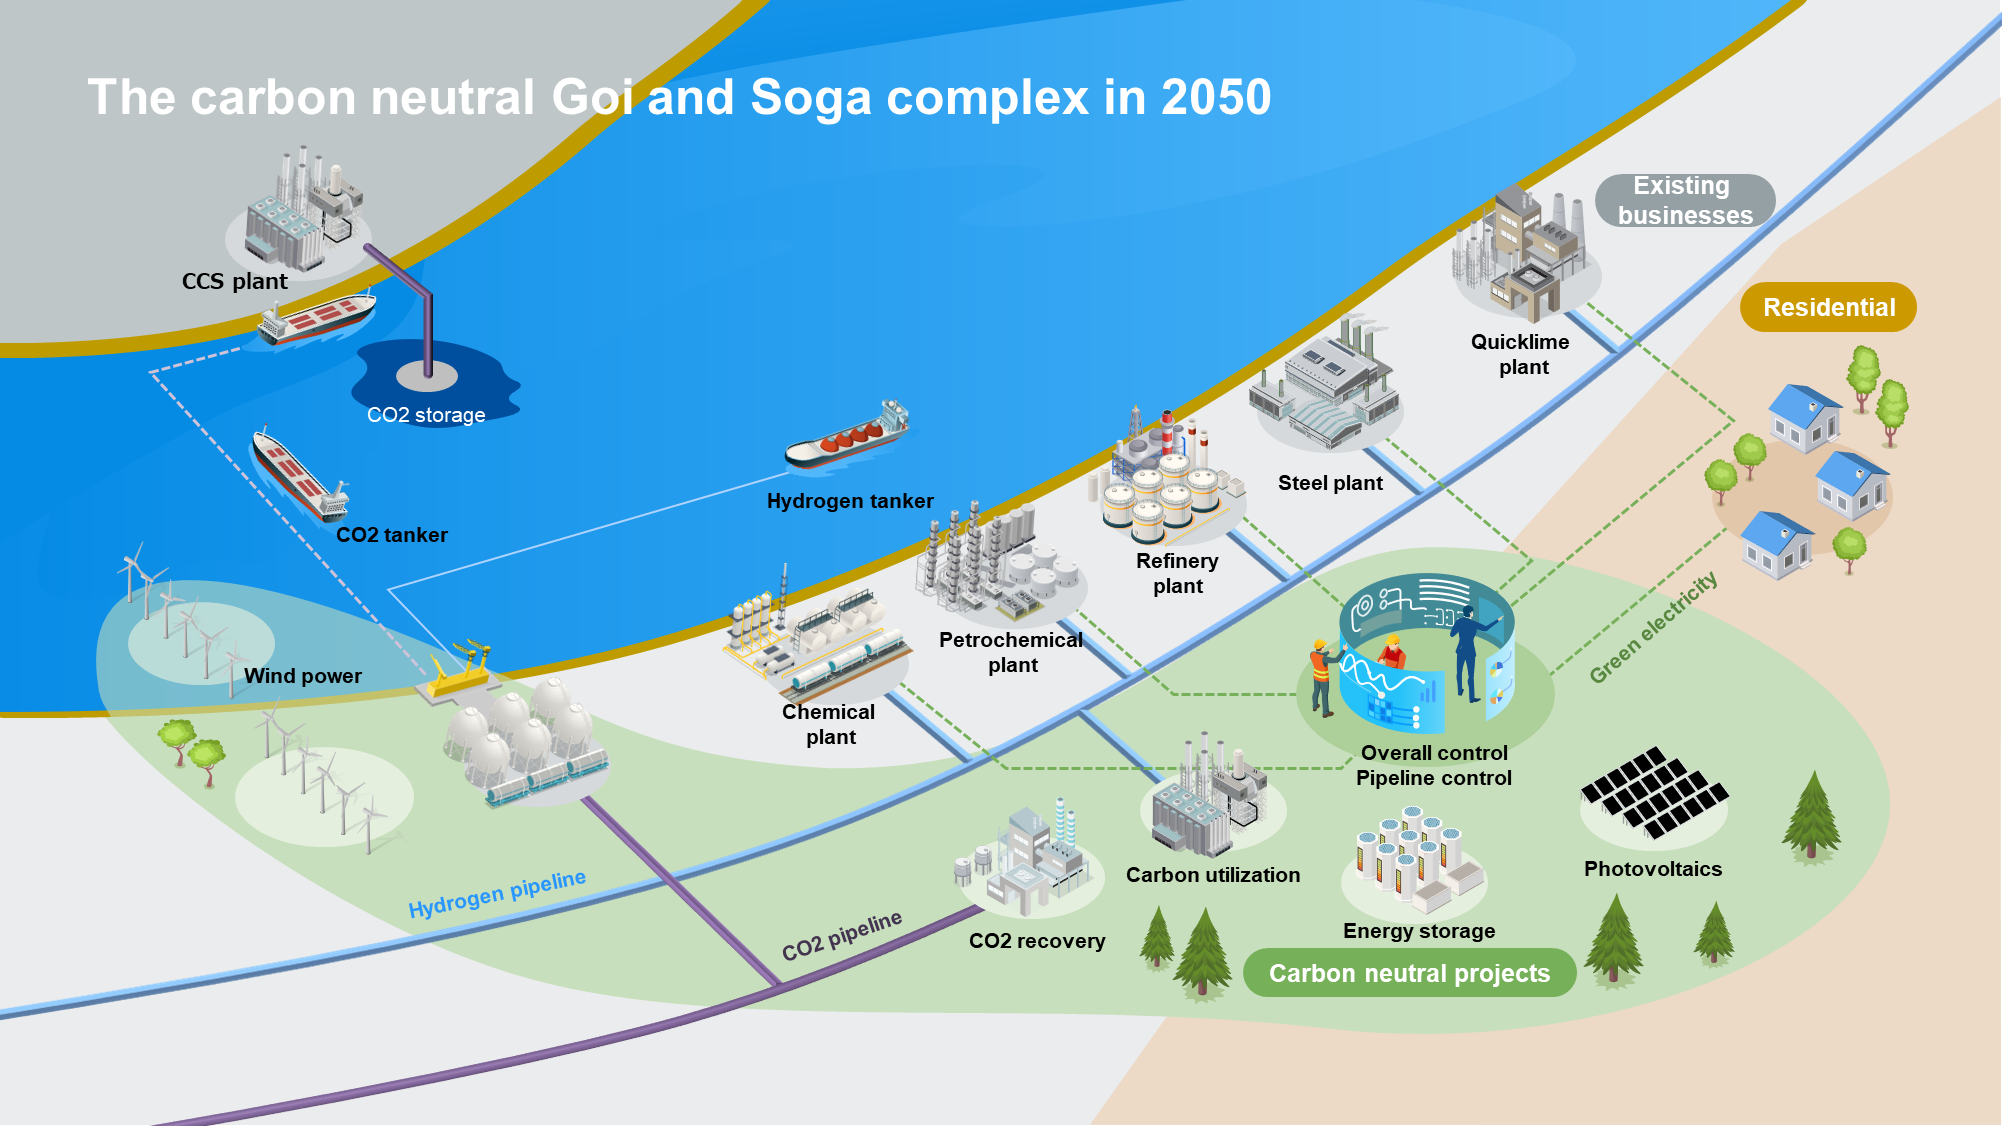 The carbon neutral Goi and Soga complex in 2050